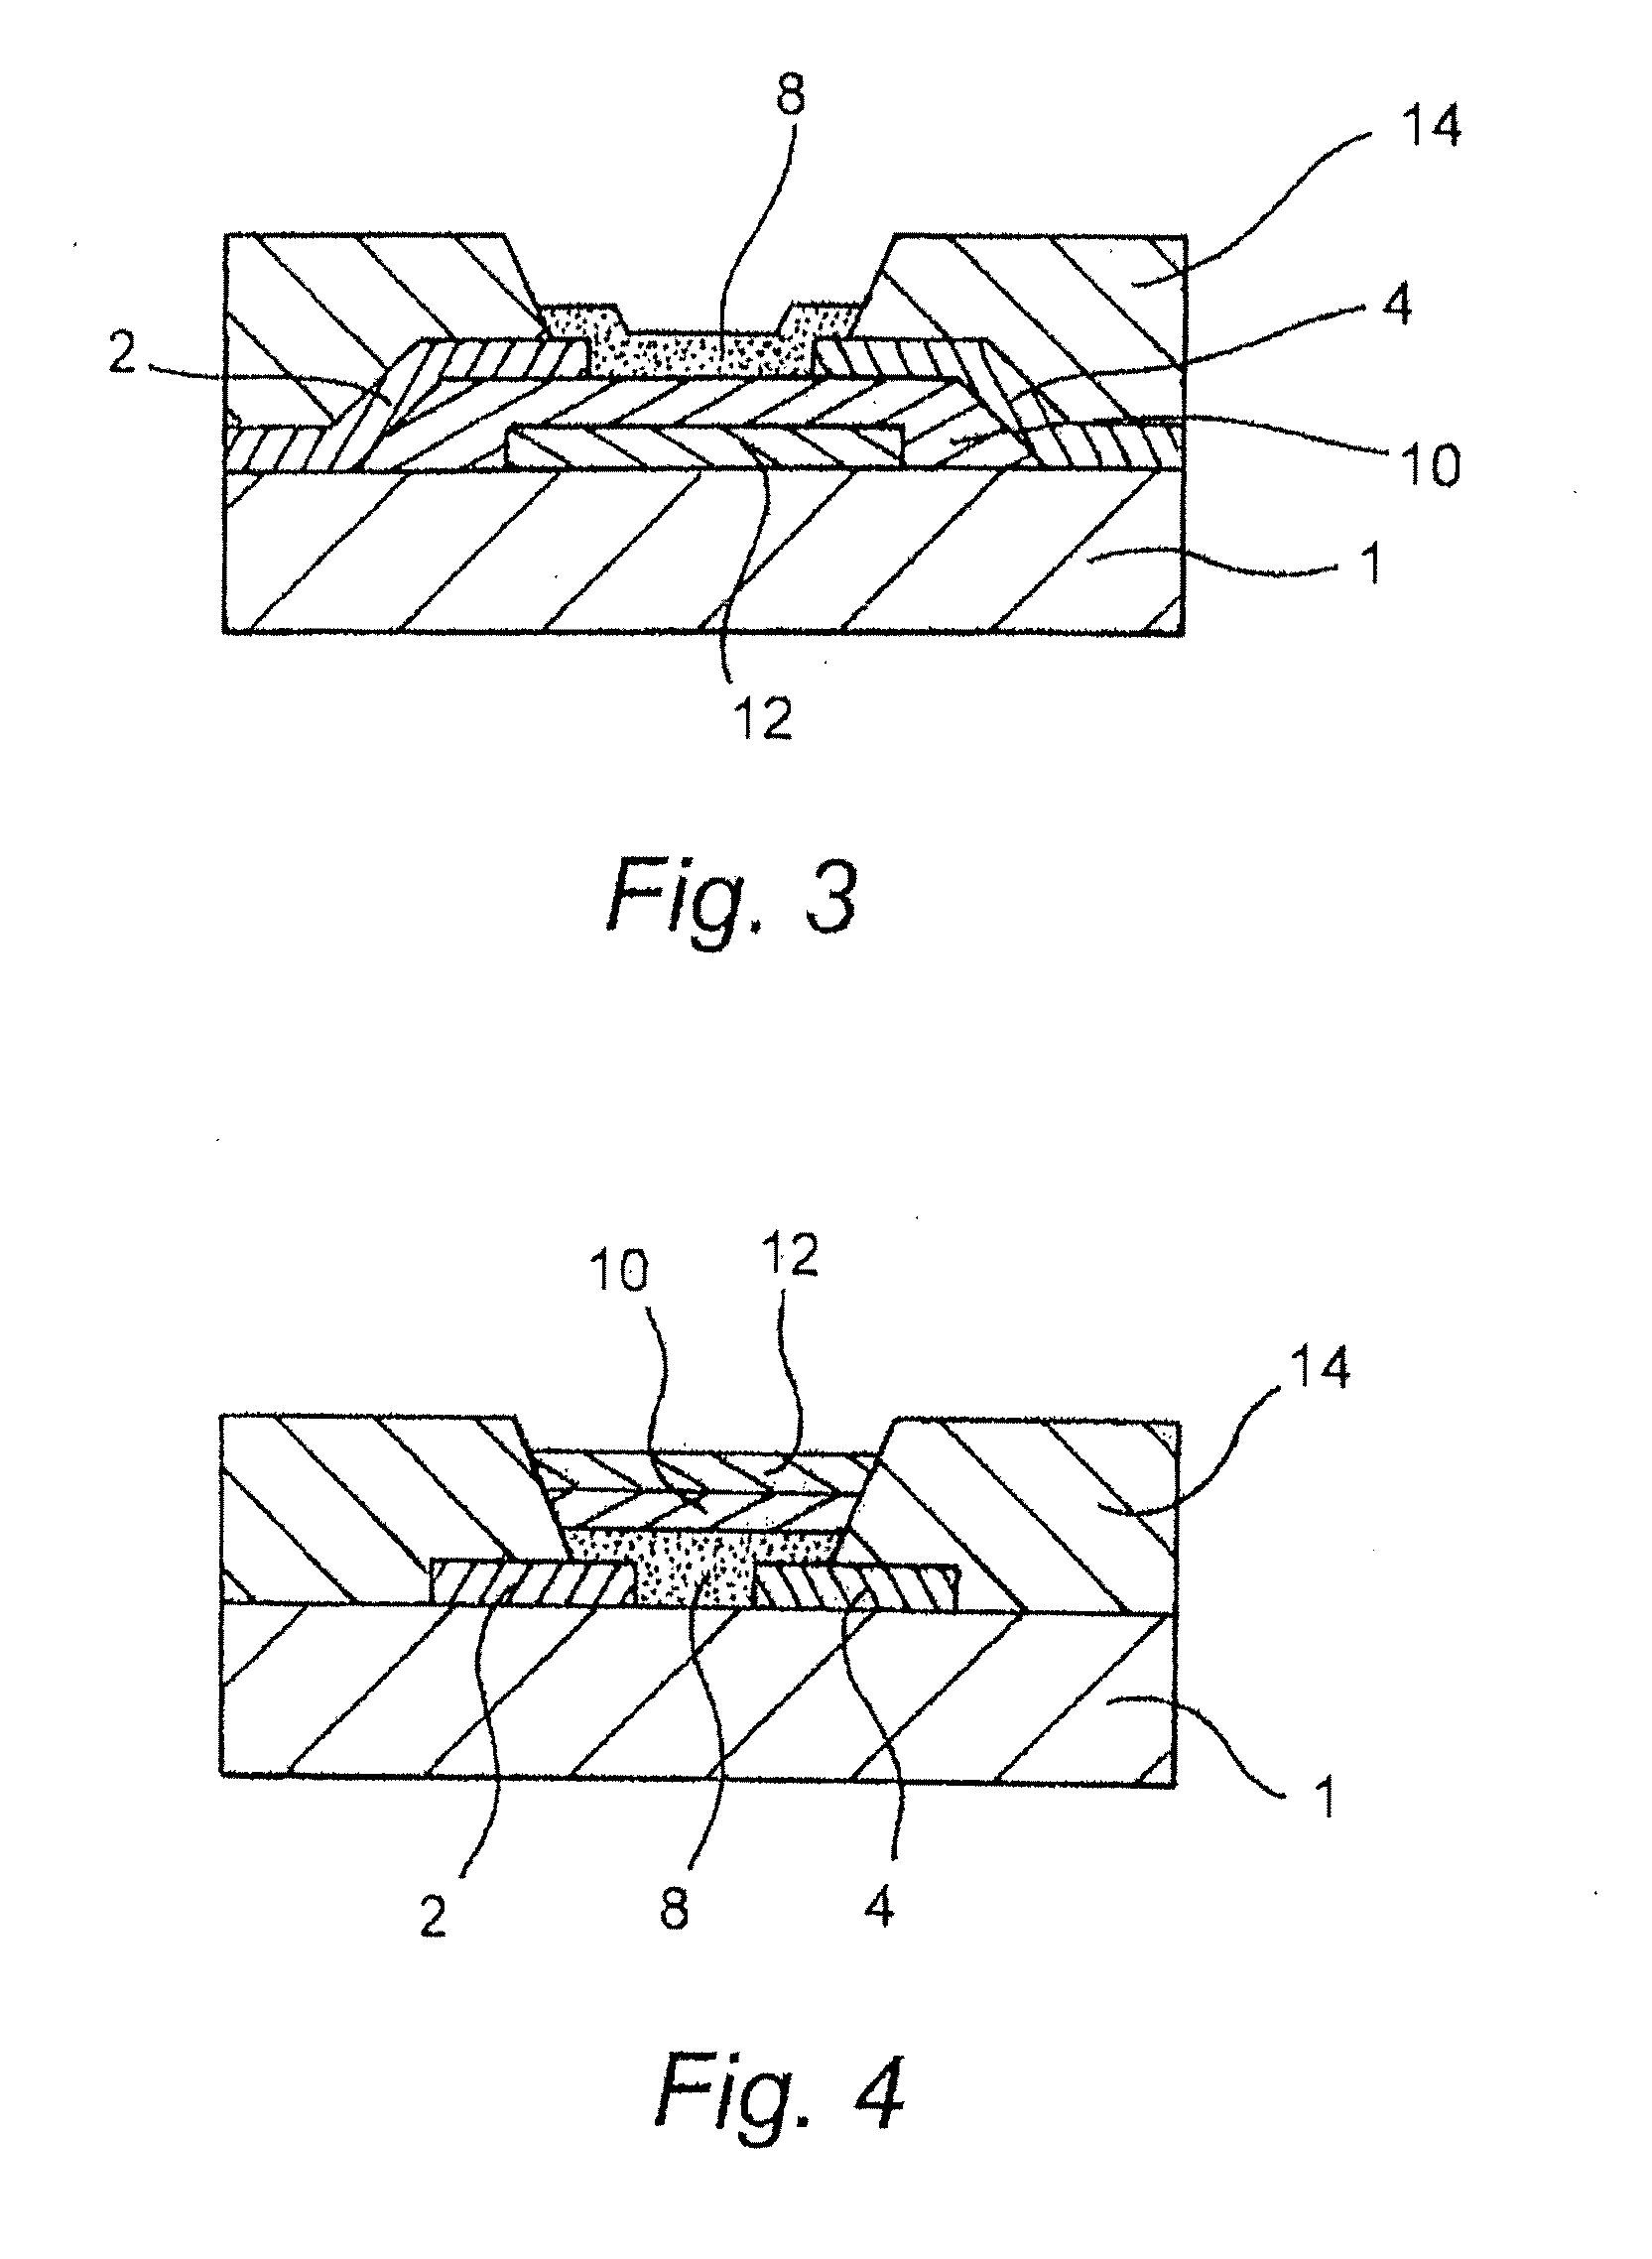 Electronic Devices and Methods of Making Them Using Solution Processing Techniques